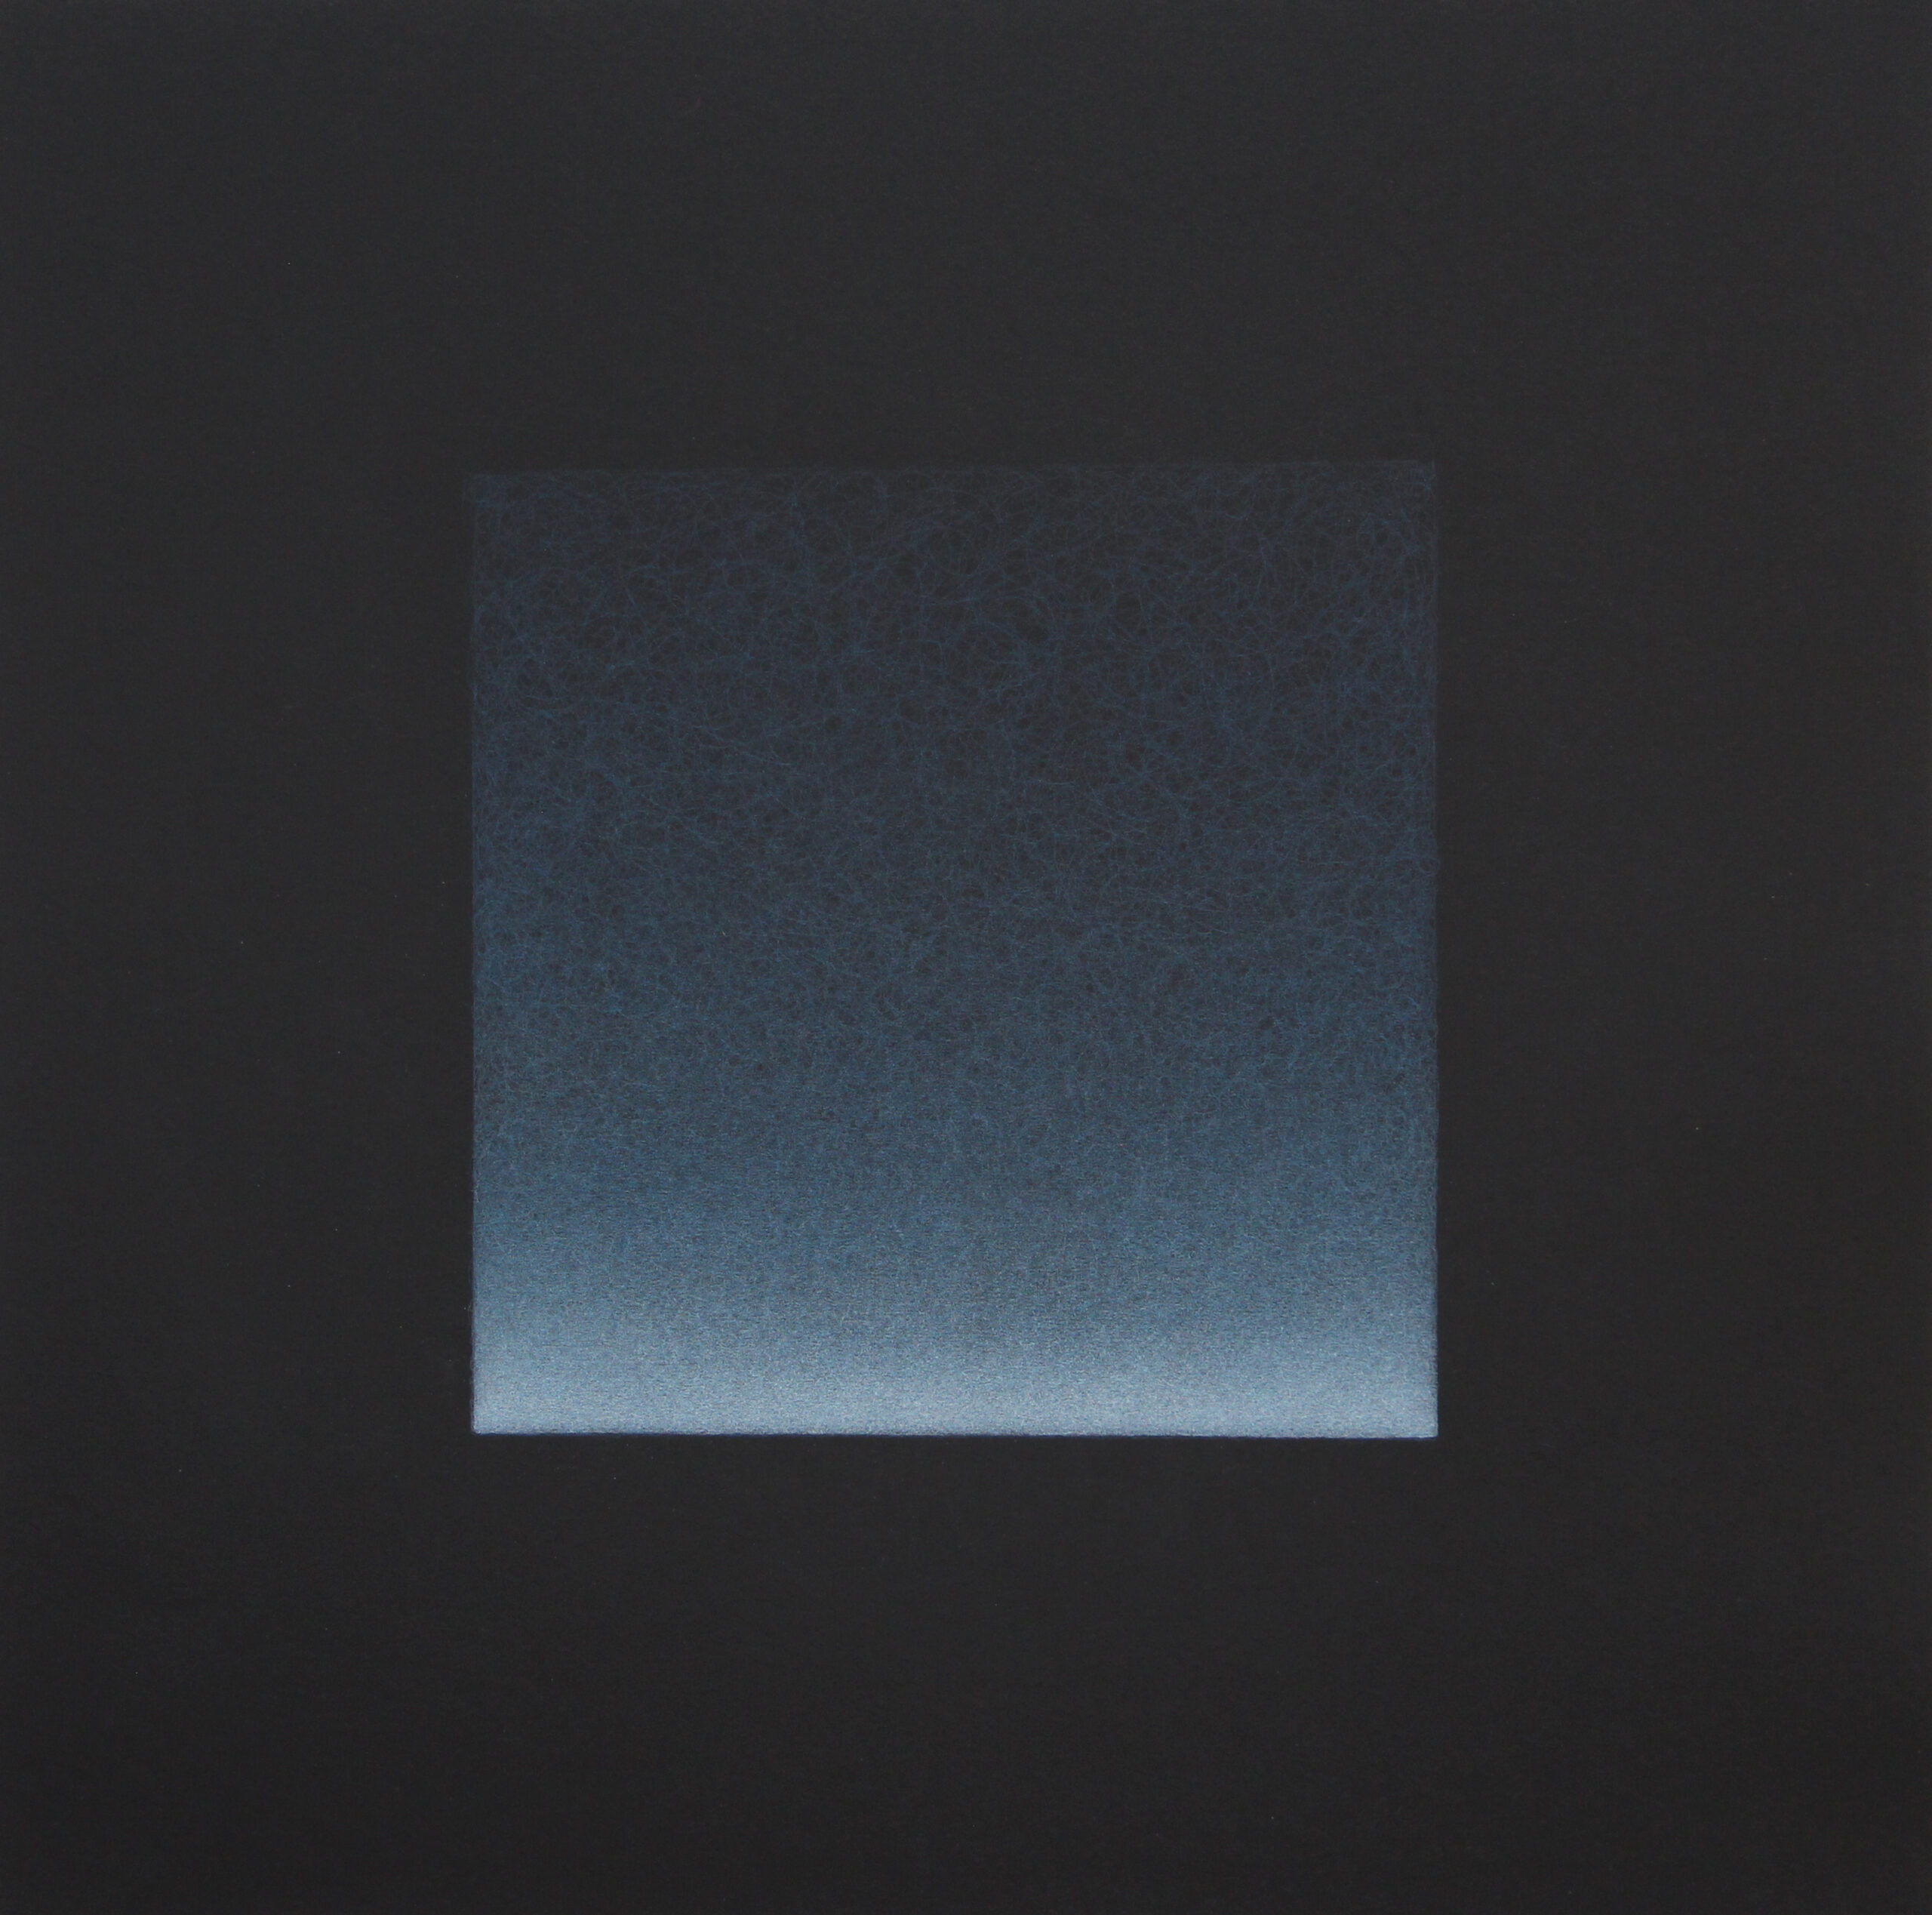 Floating Phthalo Blue Square, 2023, colored pencil on black paper, 20 x 20"